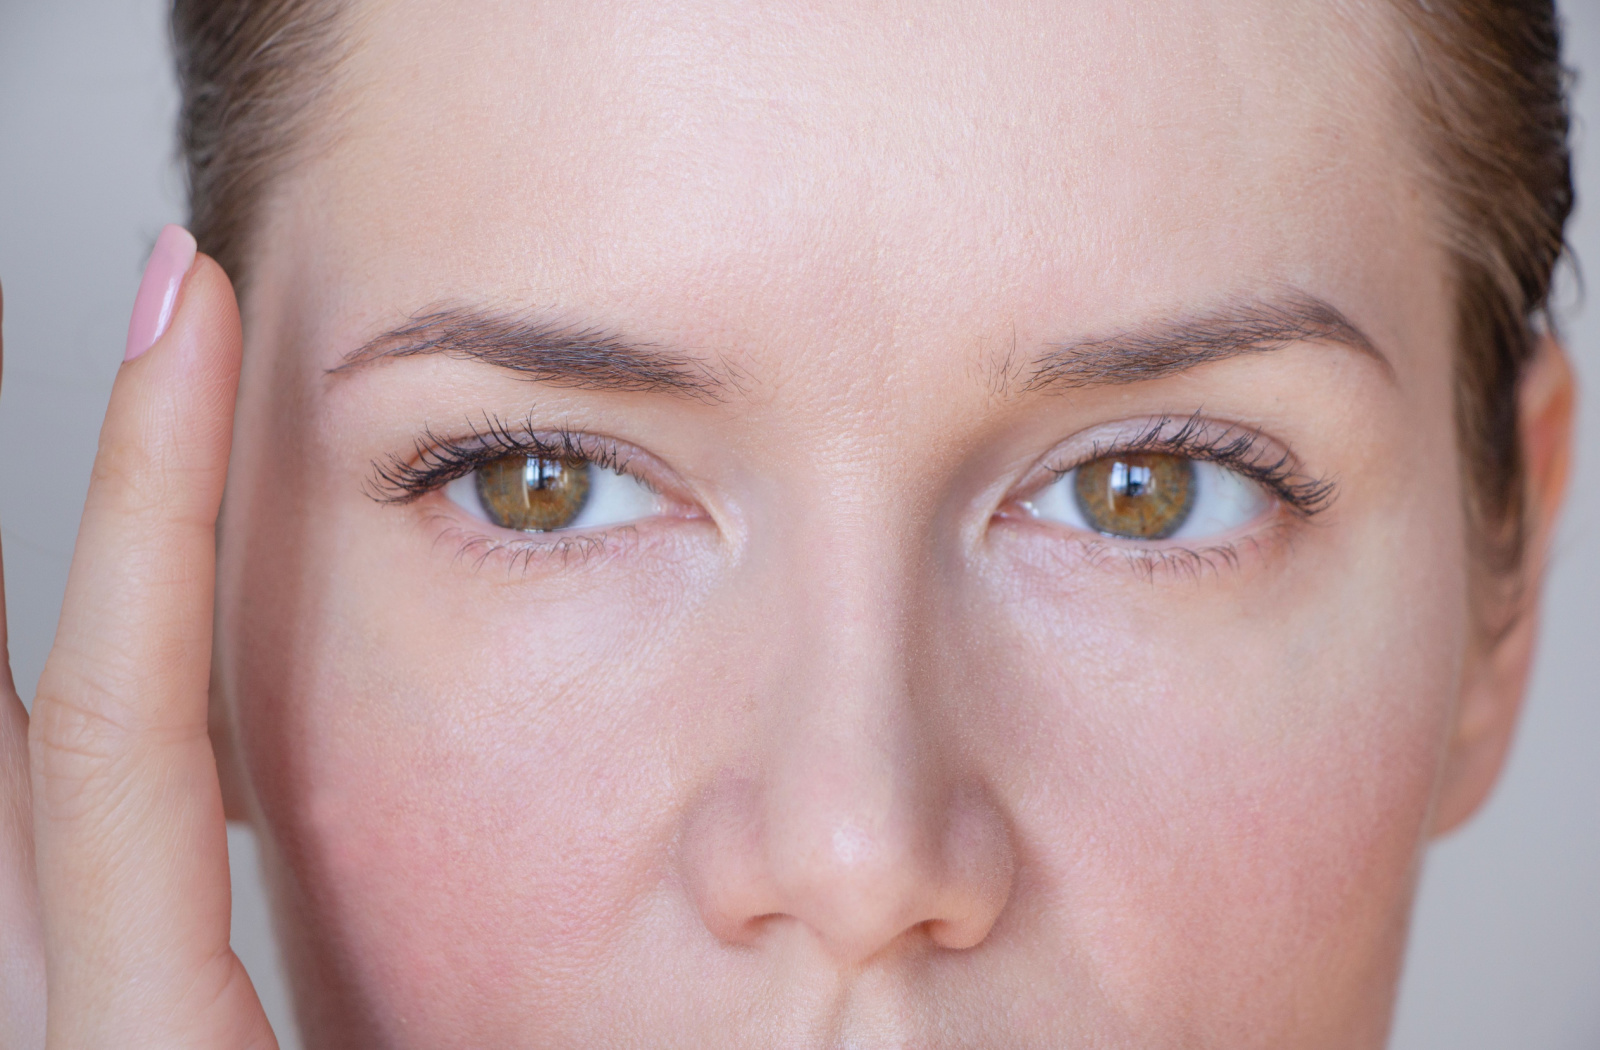 A close-up image of a woman's face and eyes